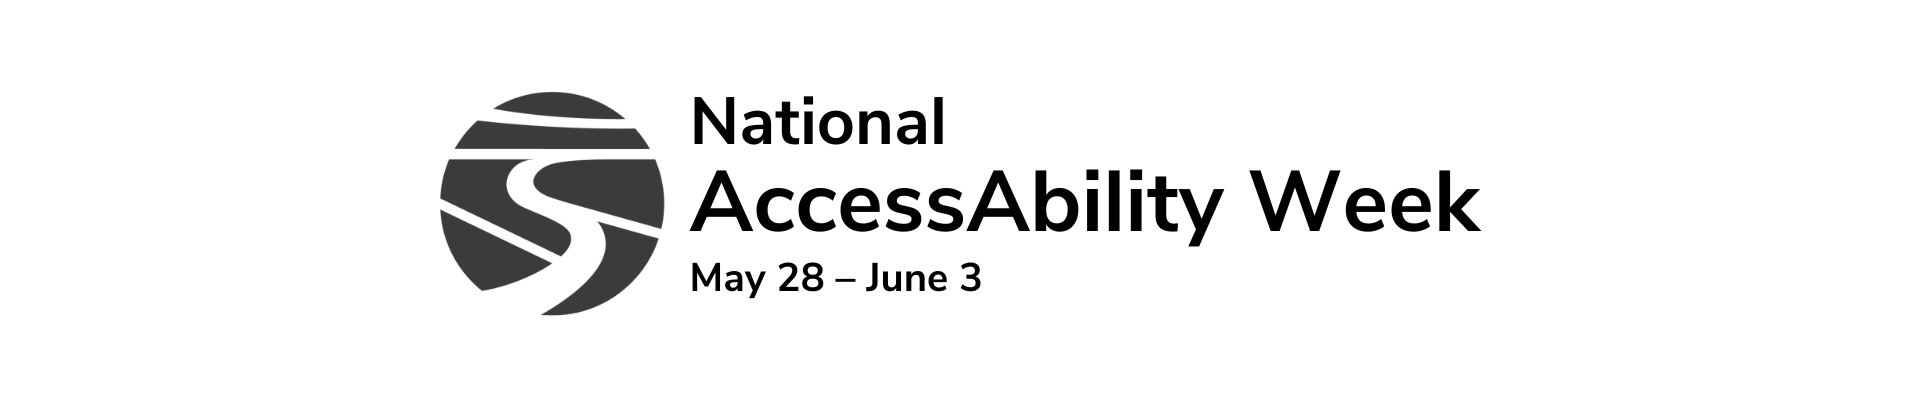 National Accesability Week - May 28 - June 3